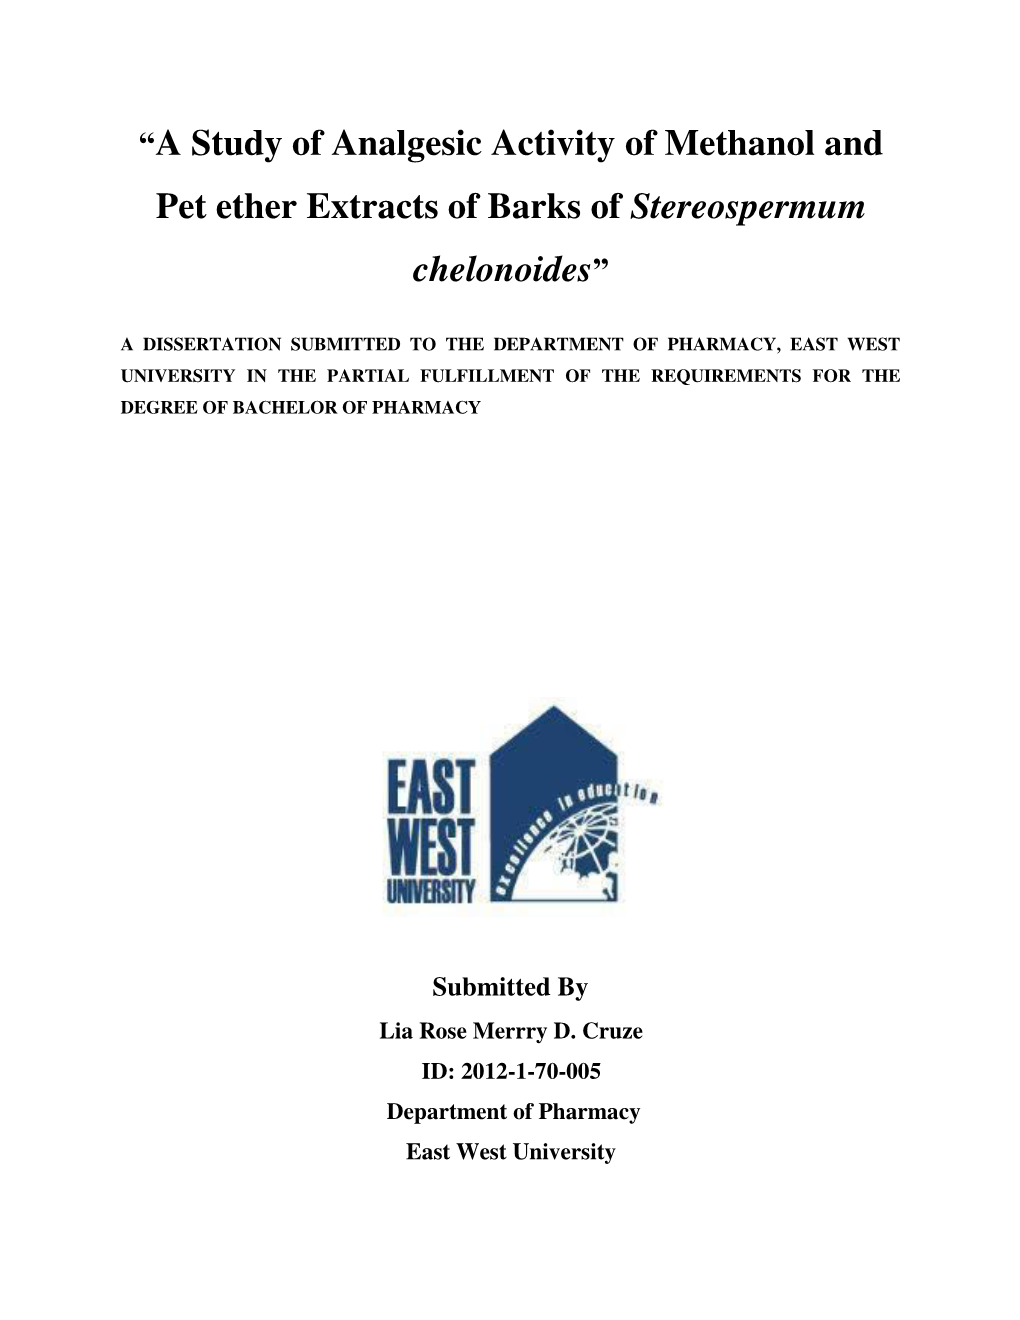 A Study of Analgesic Activity of Methanol and Pet Ether Extracts of Barks of Stereospermum